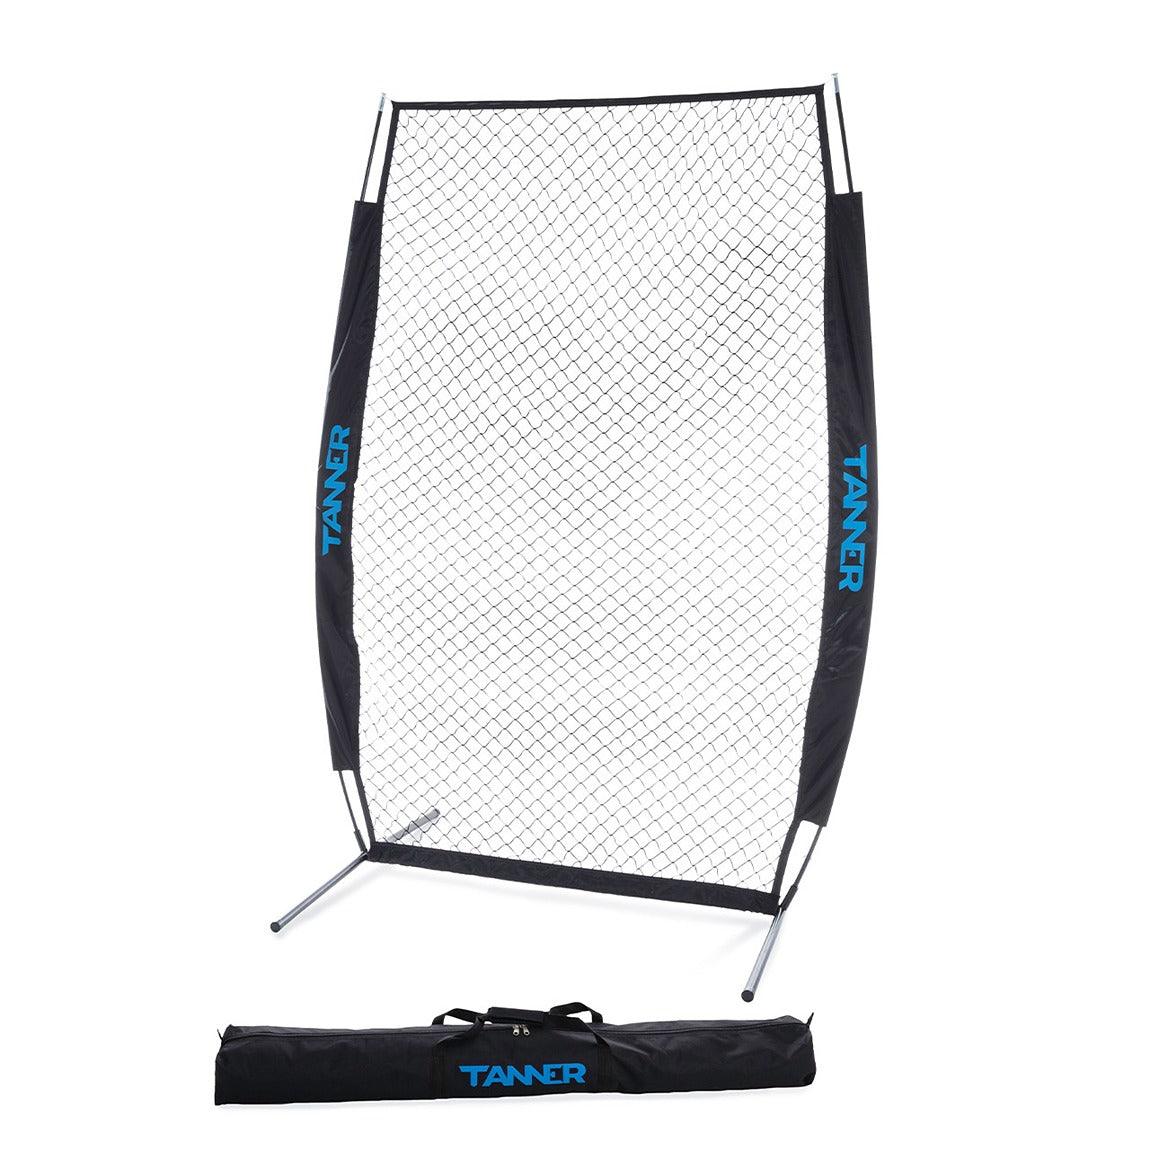 Tanner Tees Portable I Screen Pitching Net with Carrying Bag